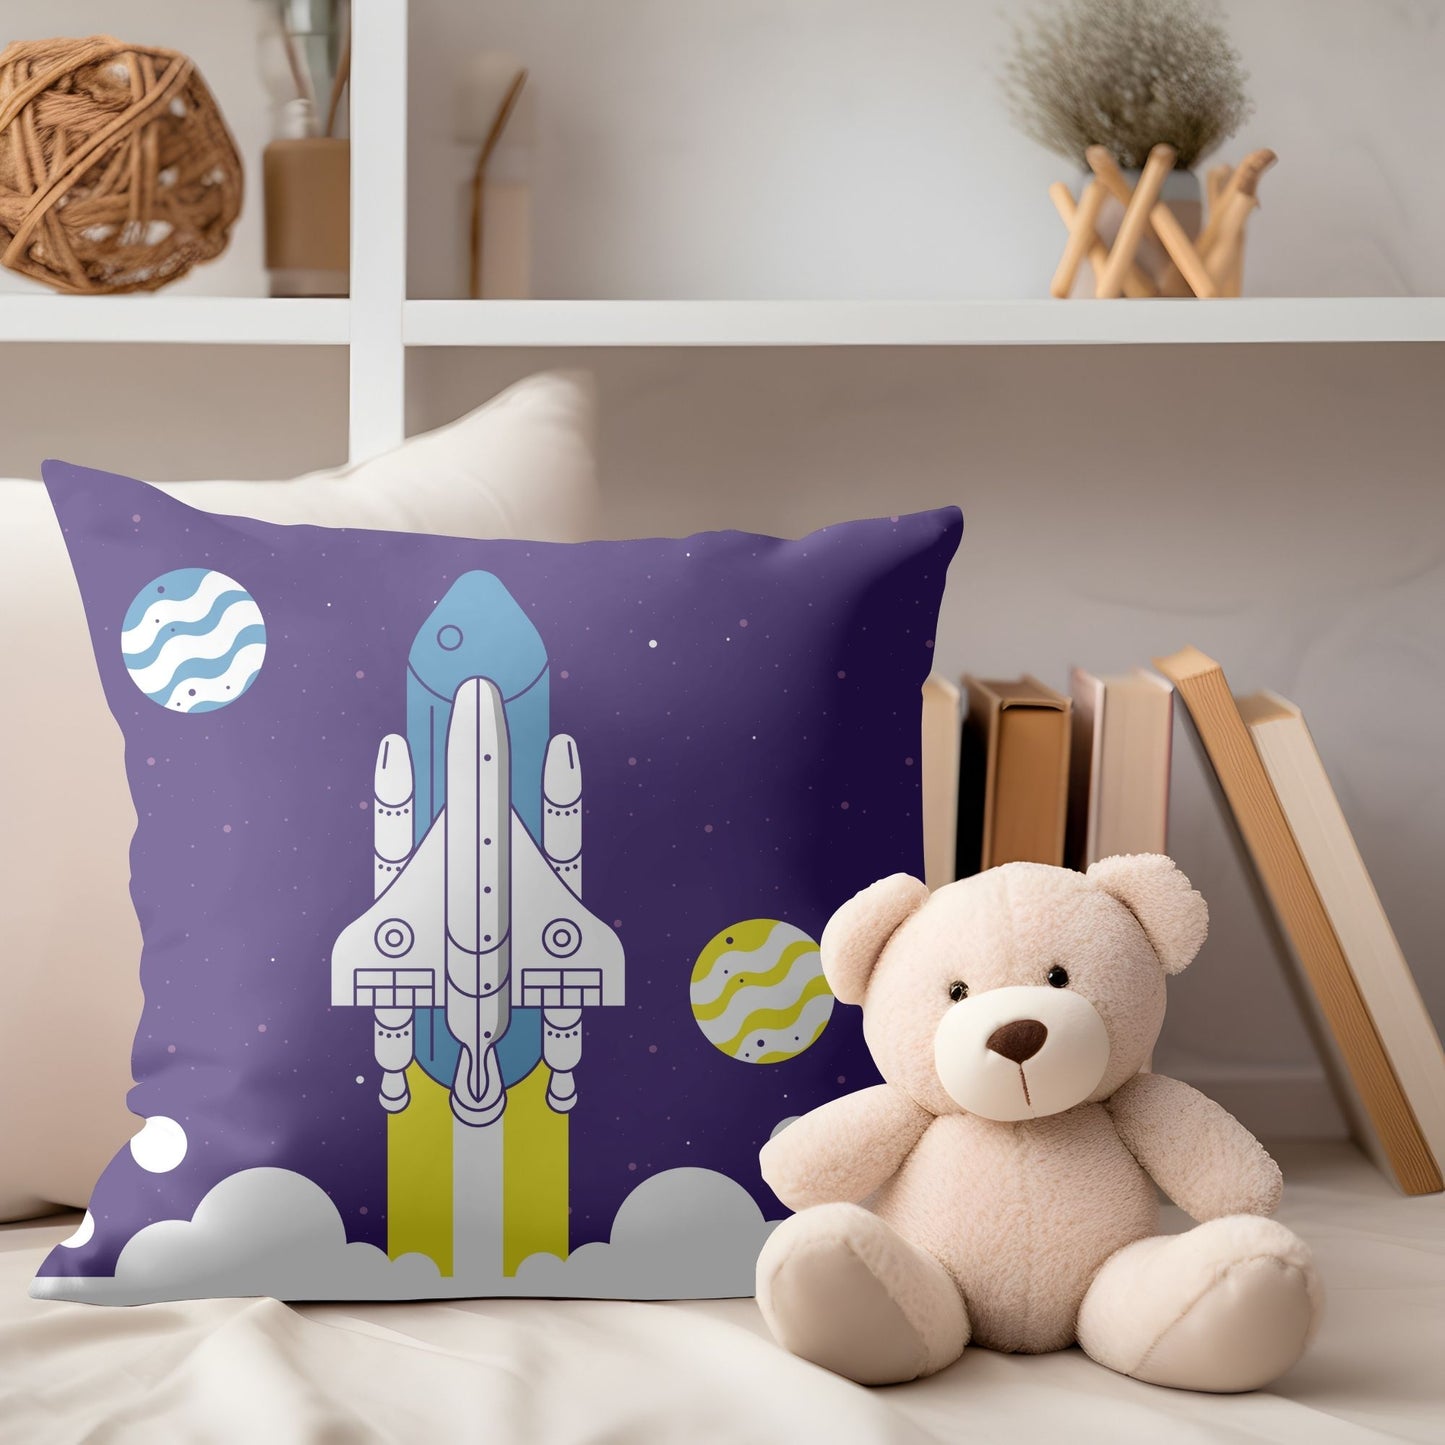 Soft pillow adorned with a space rocket blasting off for kids' rooms.